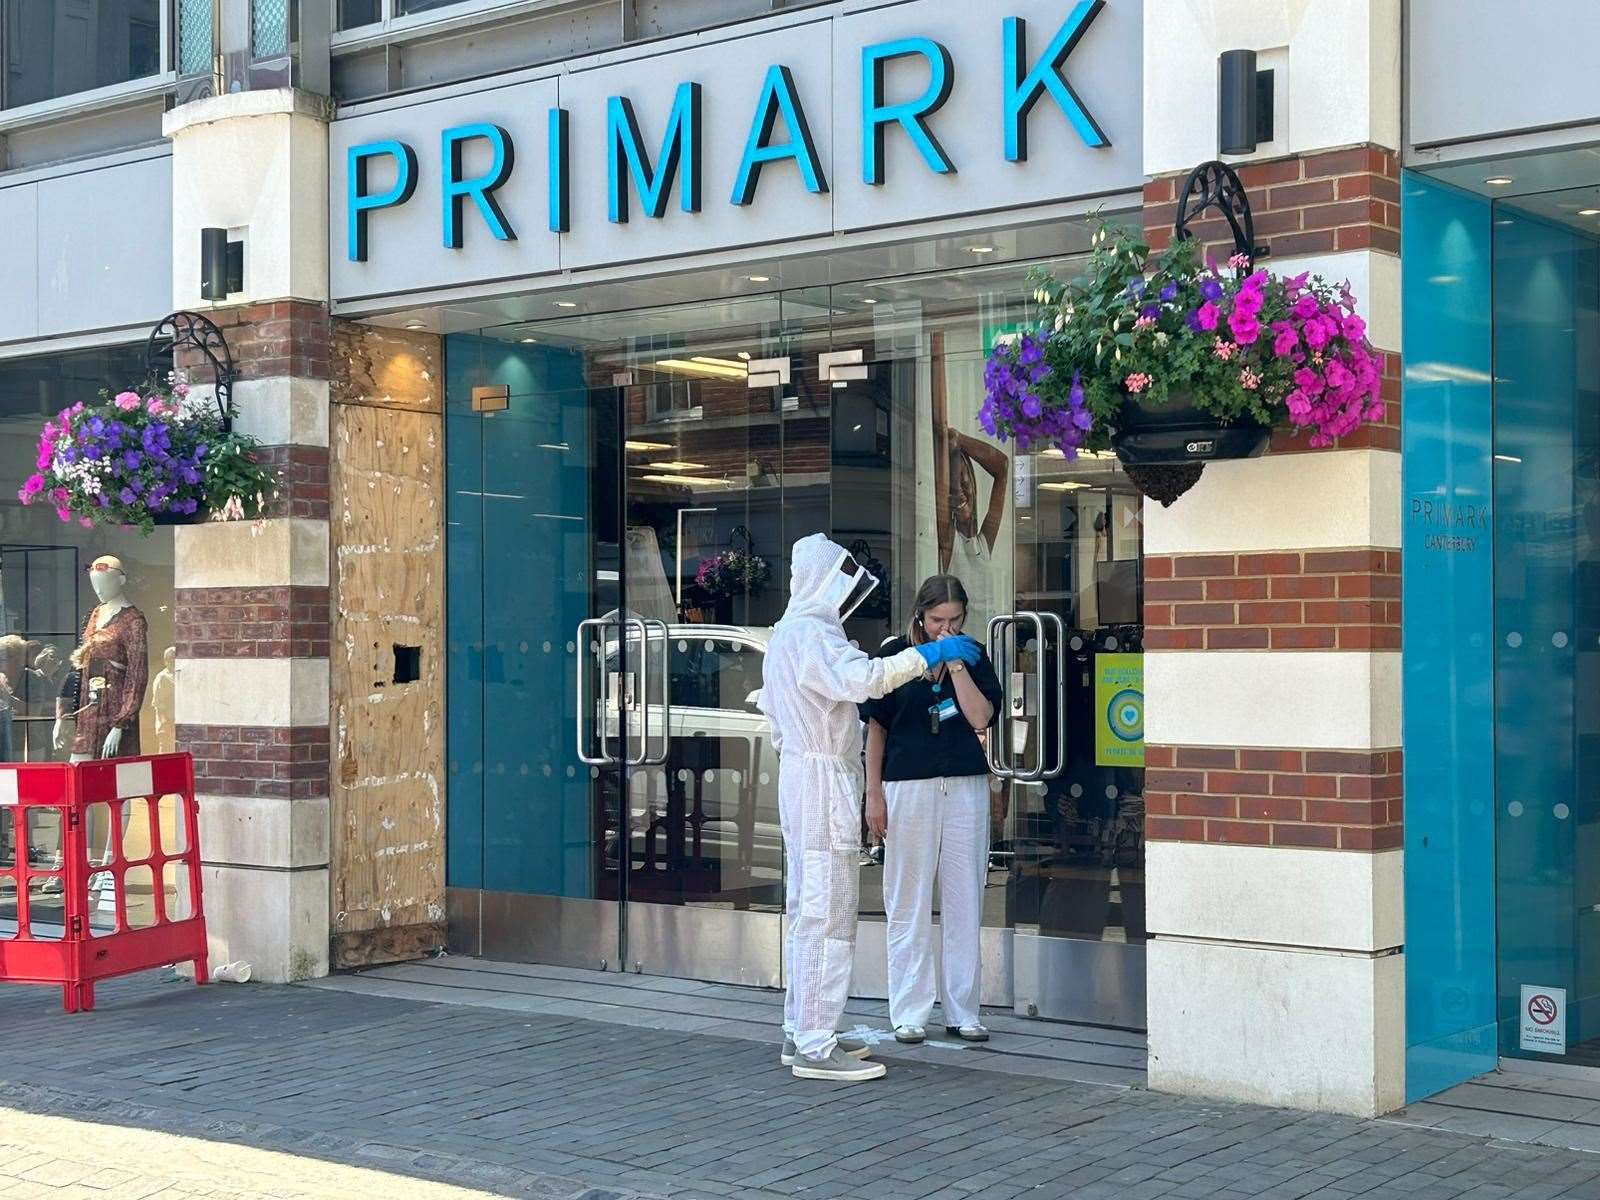 A beekeeper outside Primark in Canterbury which has been evacuated after a swarm of bees clustered around a hanging basket